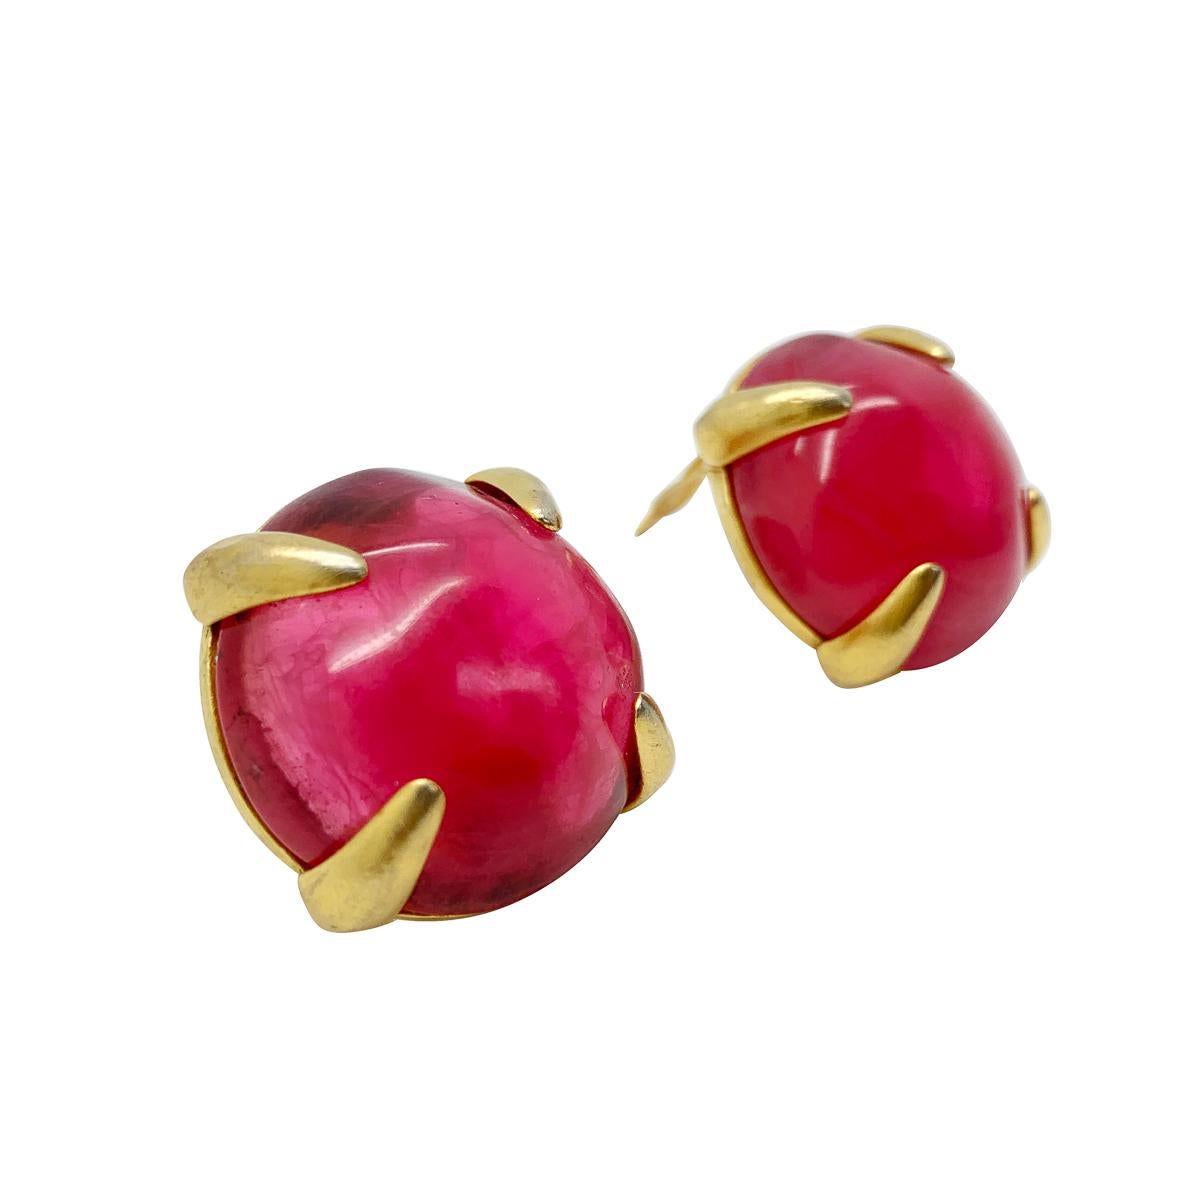 Exceptional artistry abounds with these vintage Givenchy pink earrings. A large bright pink textured cabochon sits proudly in a golden open claw setting. The cabochon emulating a ruby with silk like inclusions. These couture beauties promise to amp